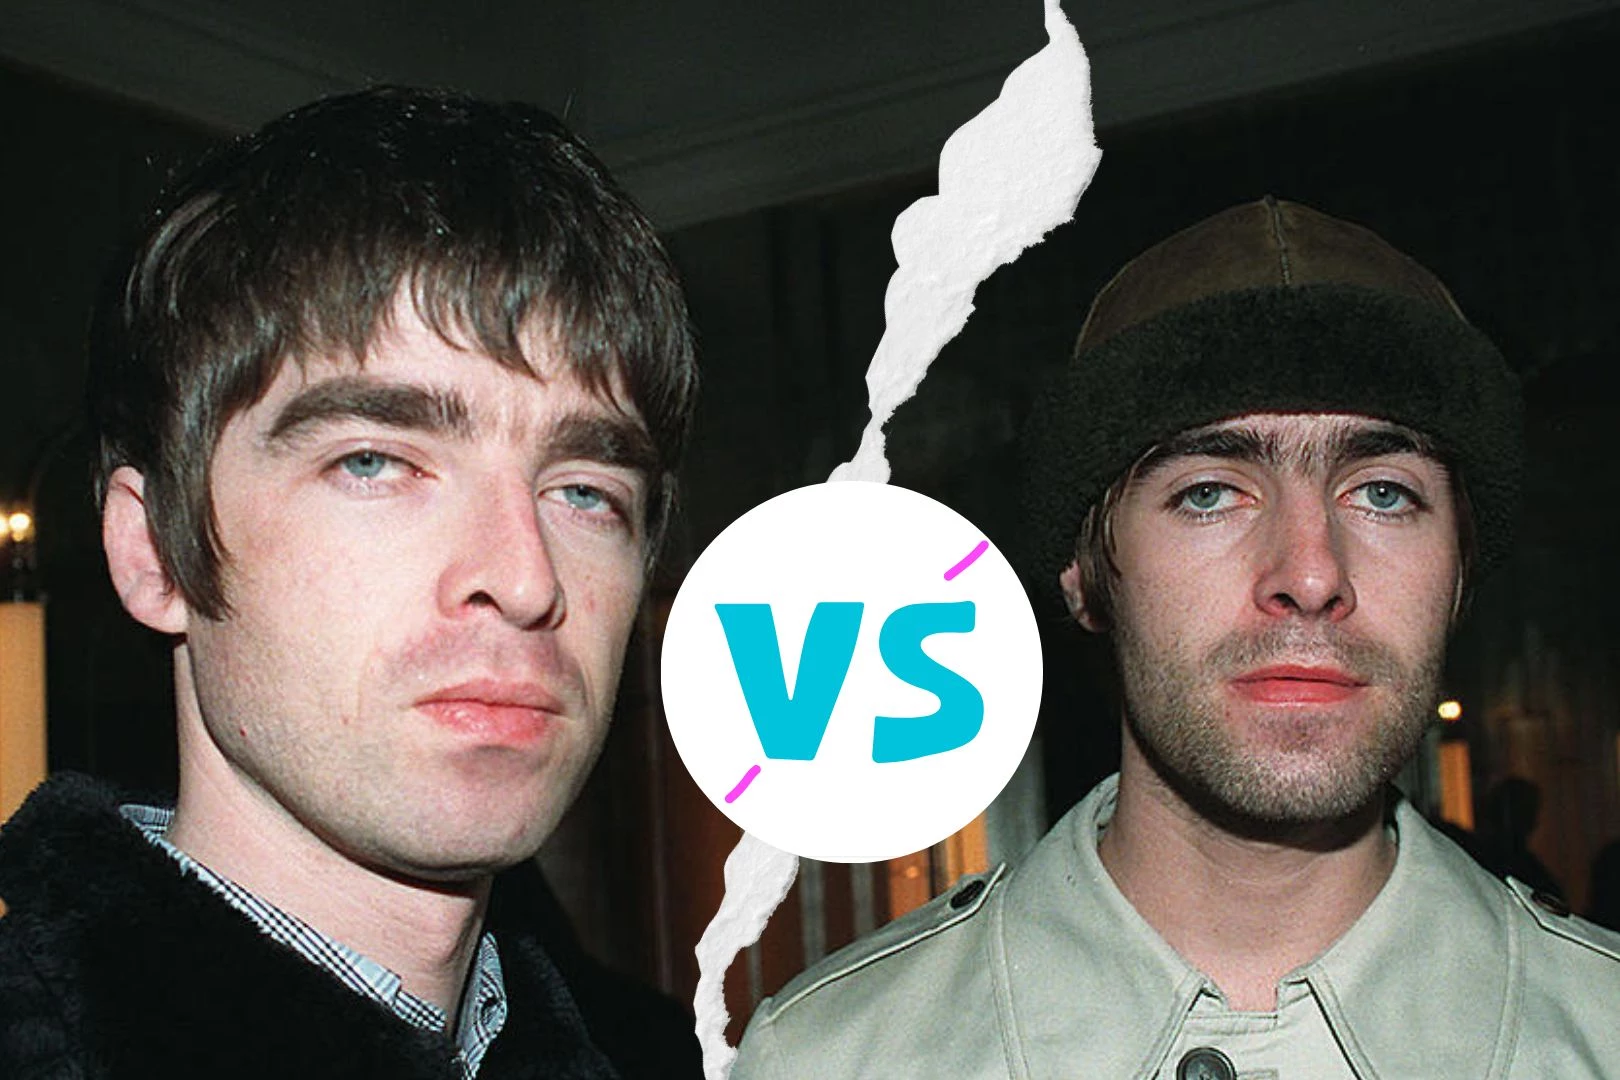 A Timeline of the Beef Between Oasis' Noel + Liam Gallagher